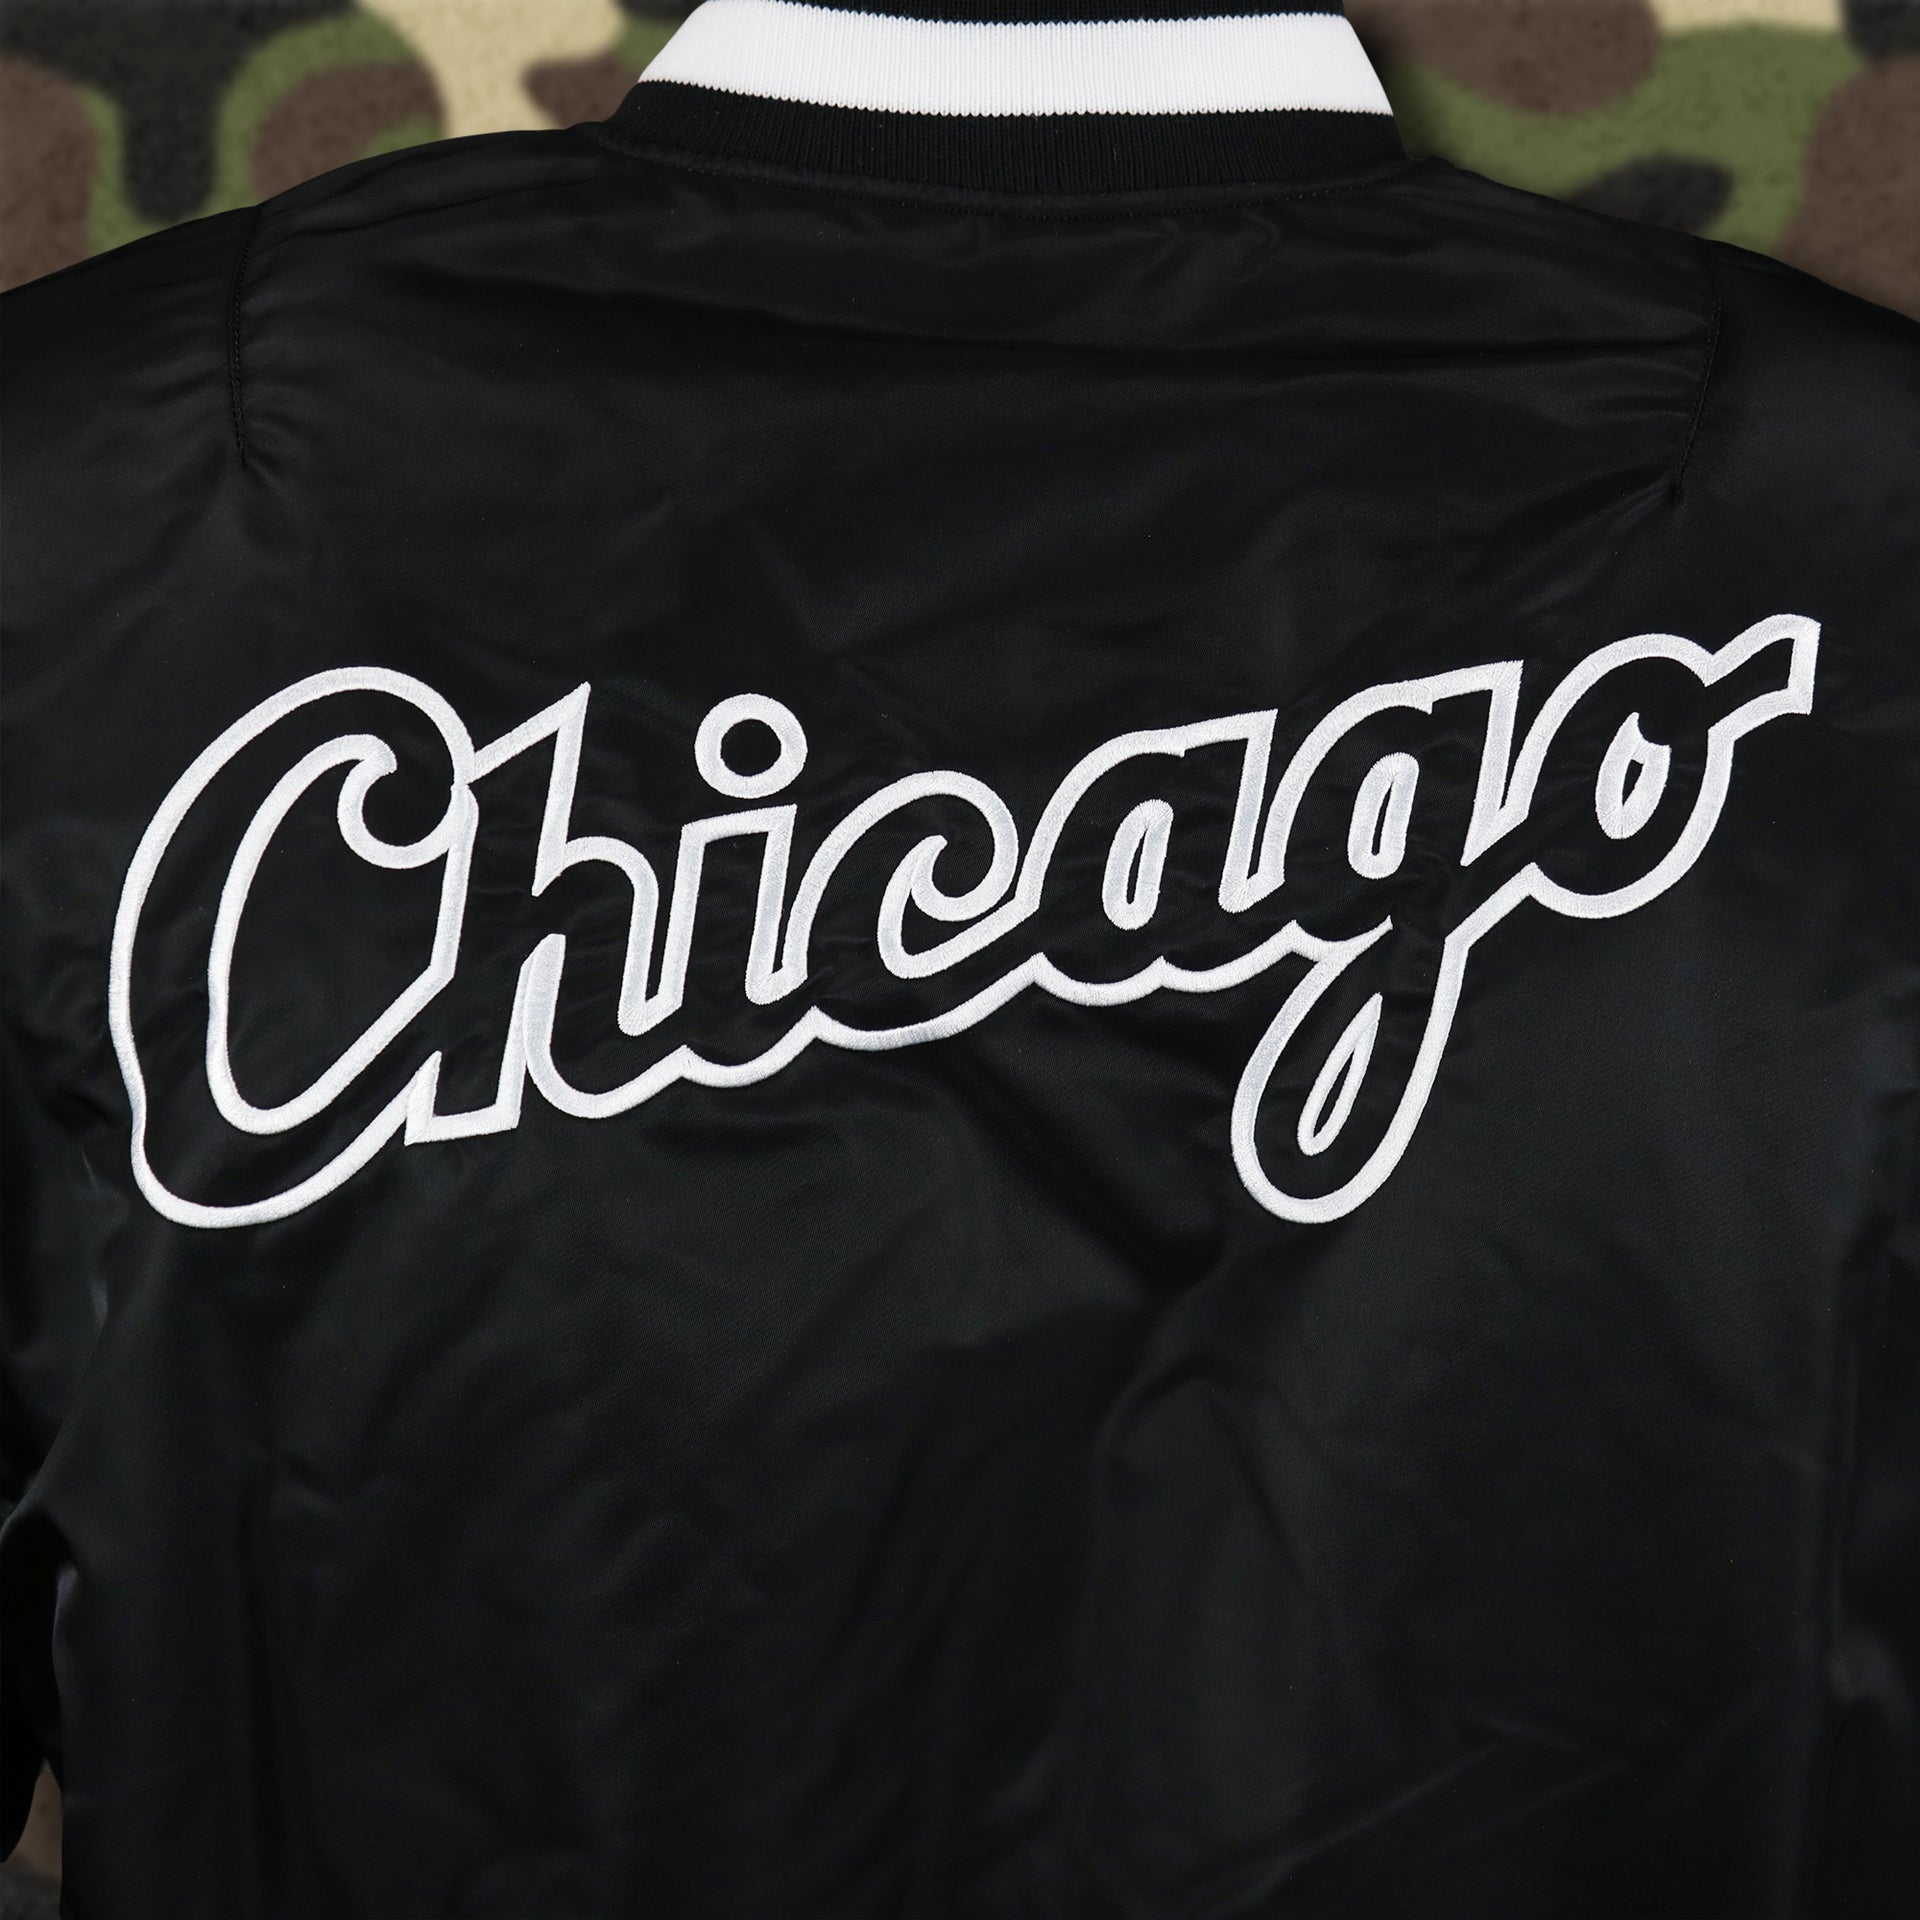 The Chicago Wordmark on the Chicago White Sox MLB Patch Alpha Industries Reversible Bomber Jacket With Camo Liner | Black Bomber Jacket